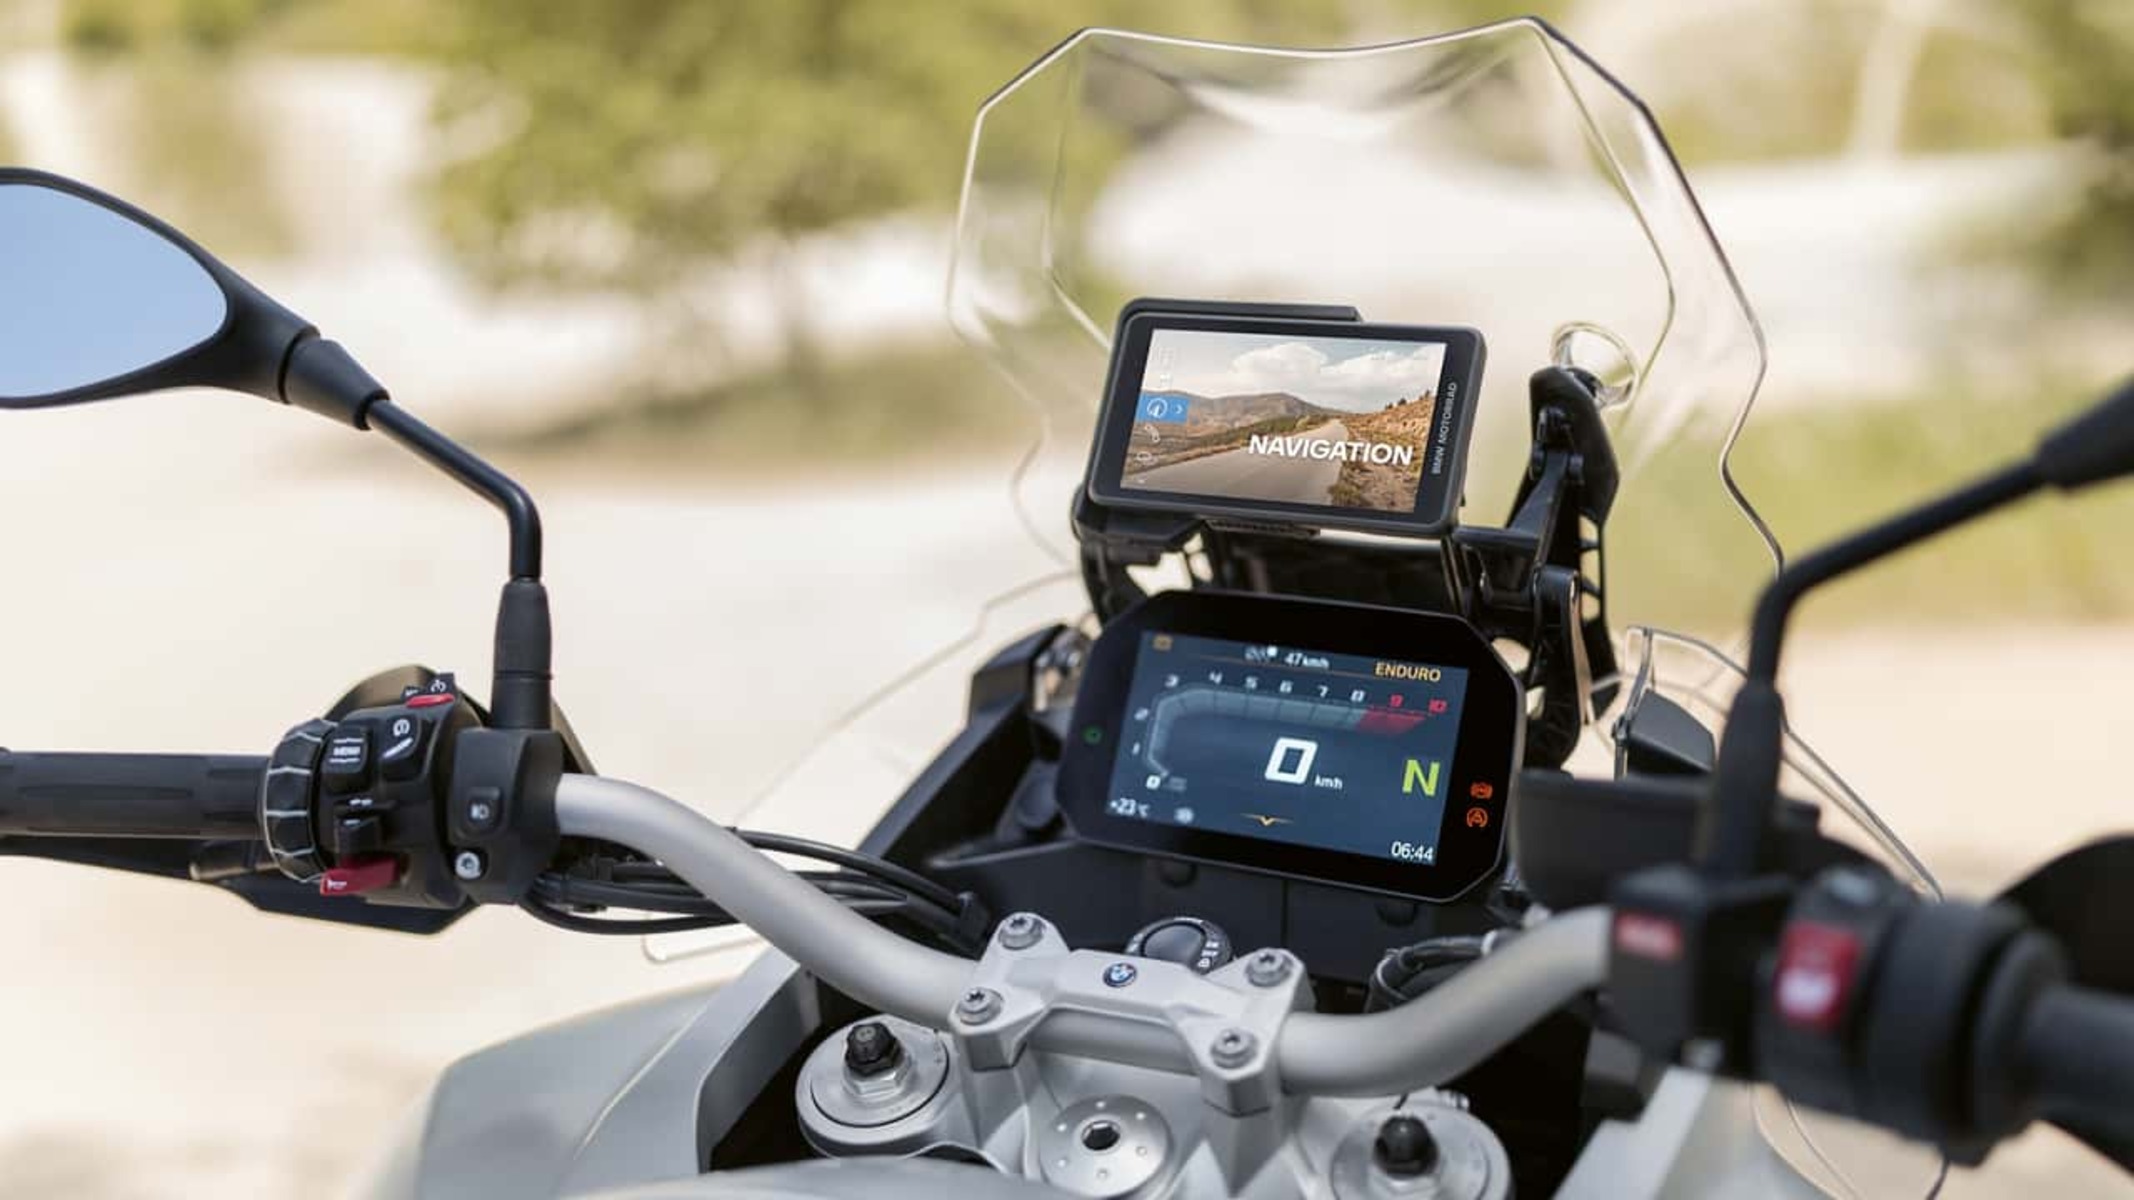 biker-security-strategically-placing-a-gps-tracker-on-your-motorcycle